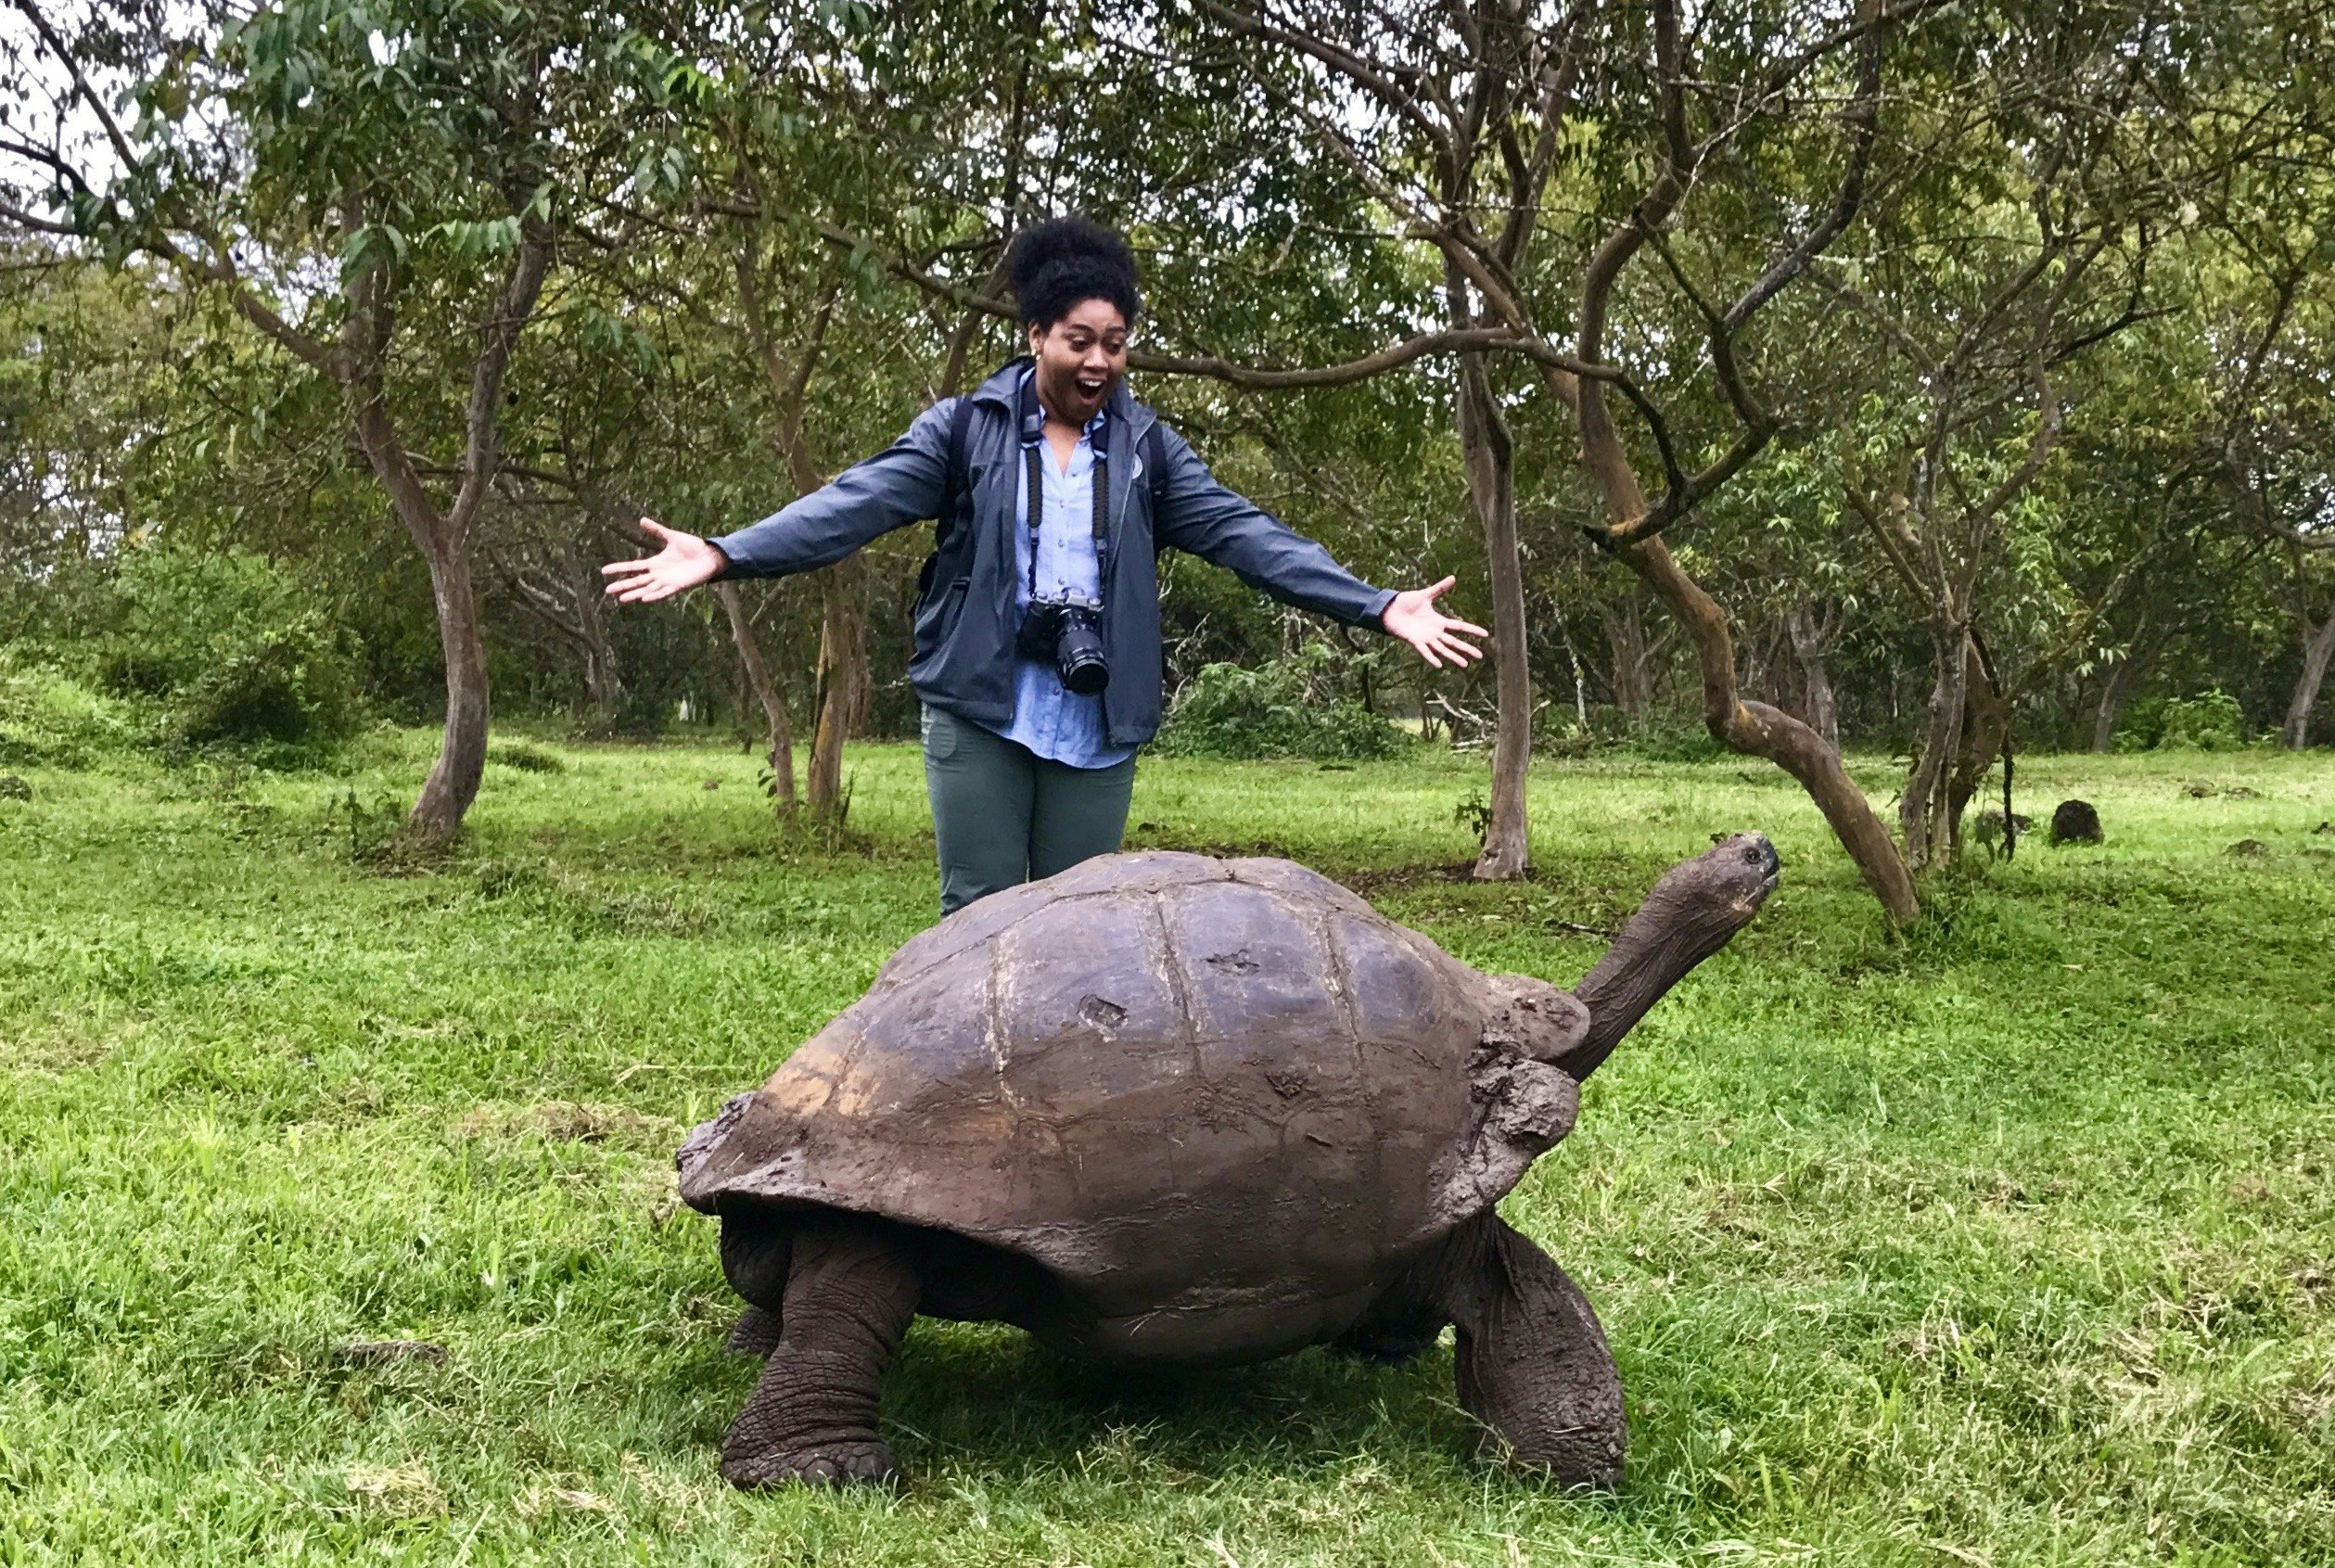 The author with a century-old Galápagos Islands tortoise